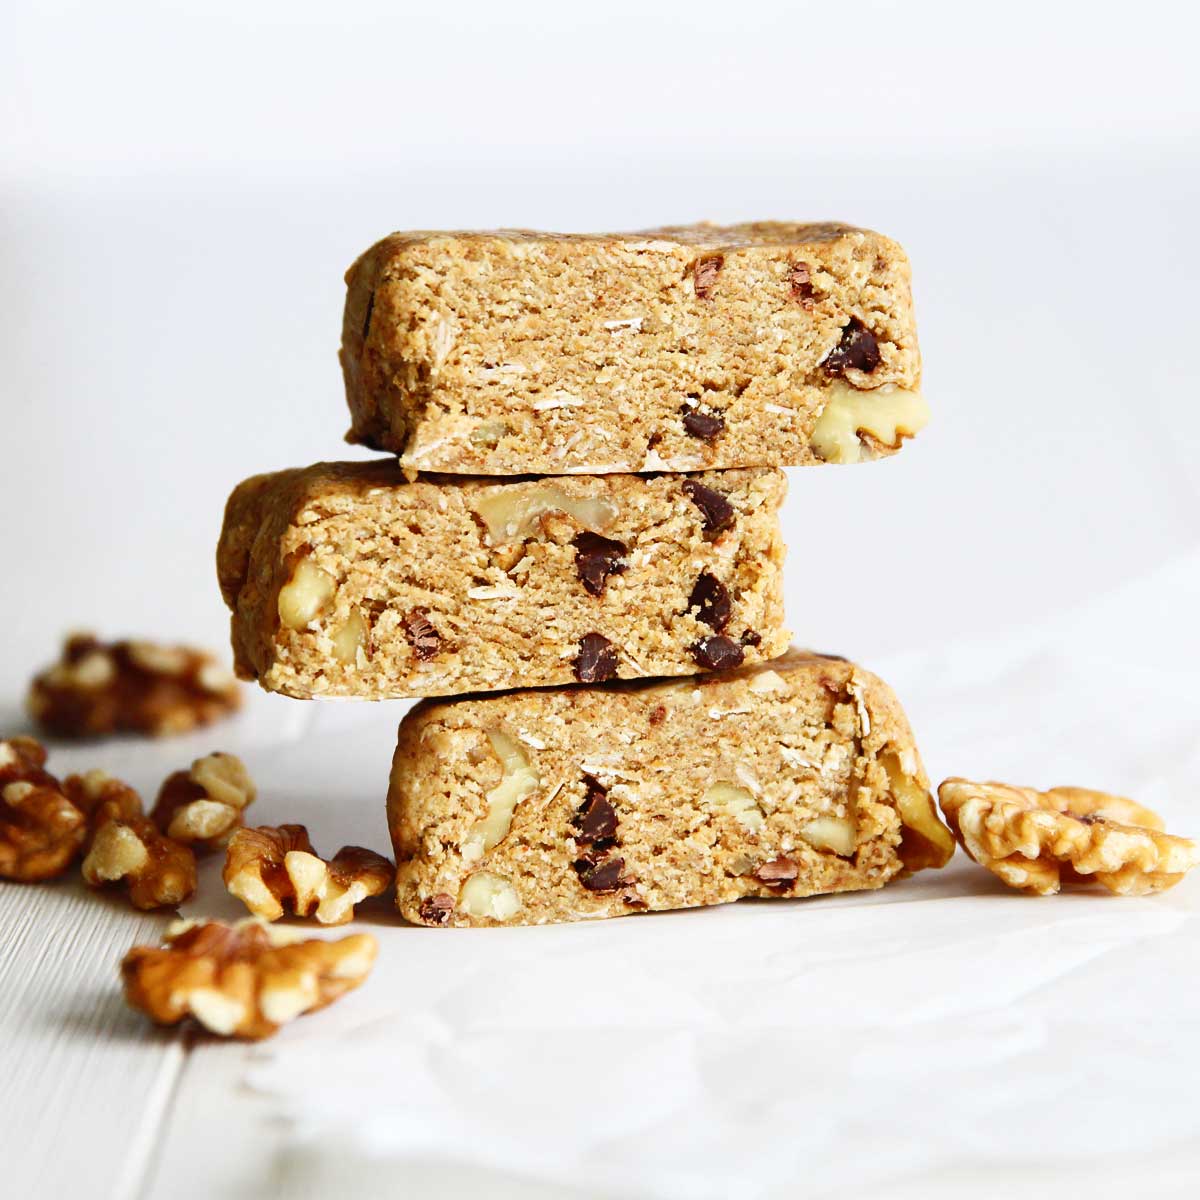 4-Ingredient Peanut Butter Oatmeal Protein Bars (Healthy, GF and Vegan) - Peanut Butter Oatmeal Protein Bars